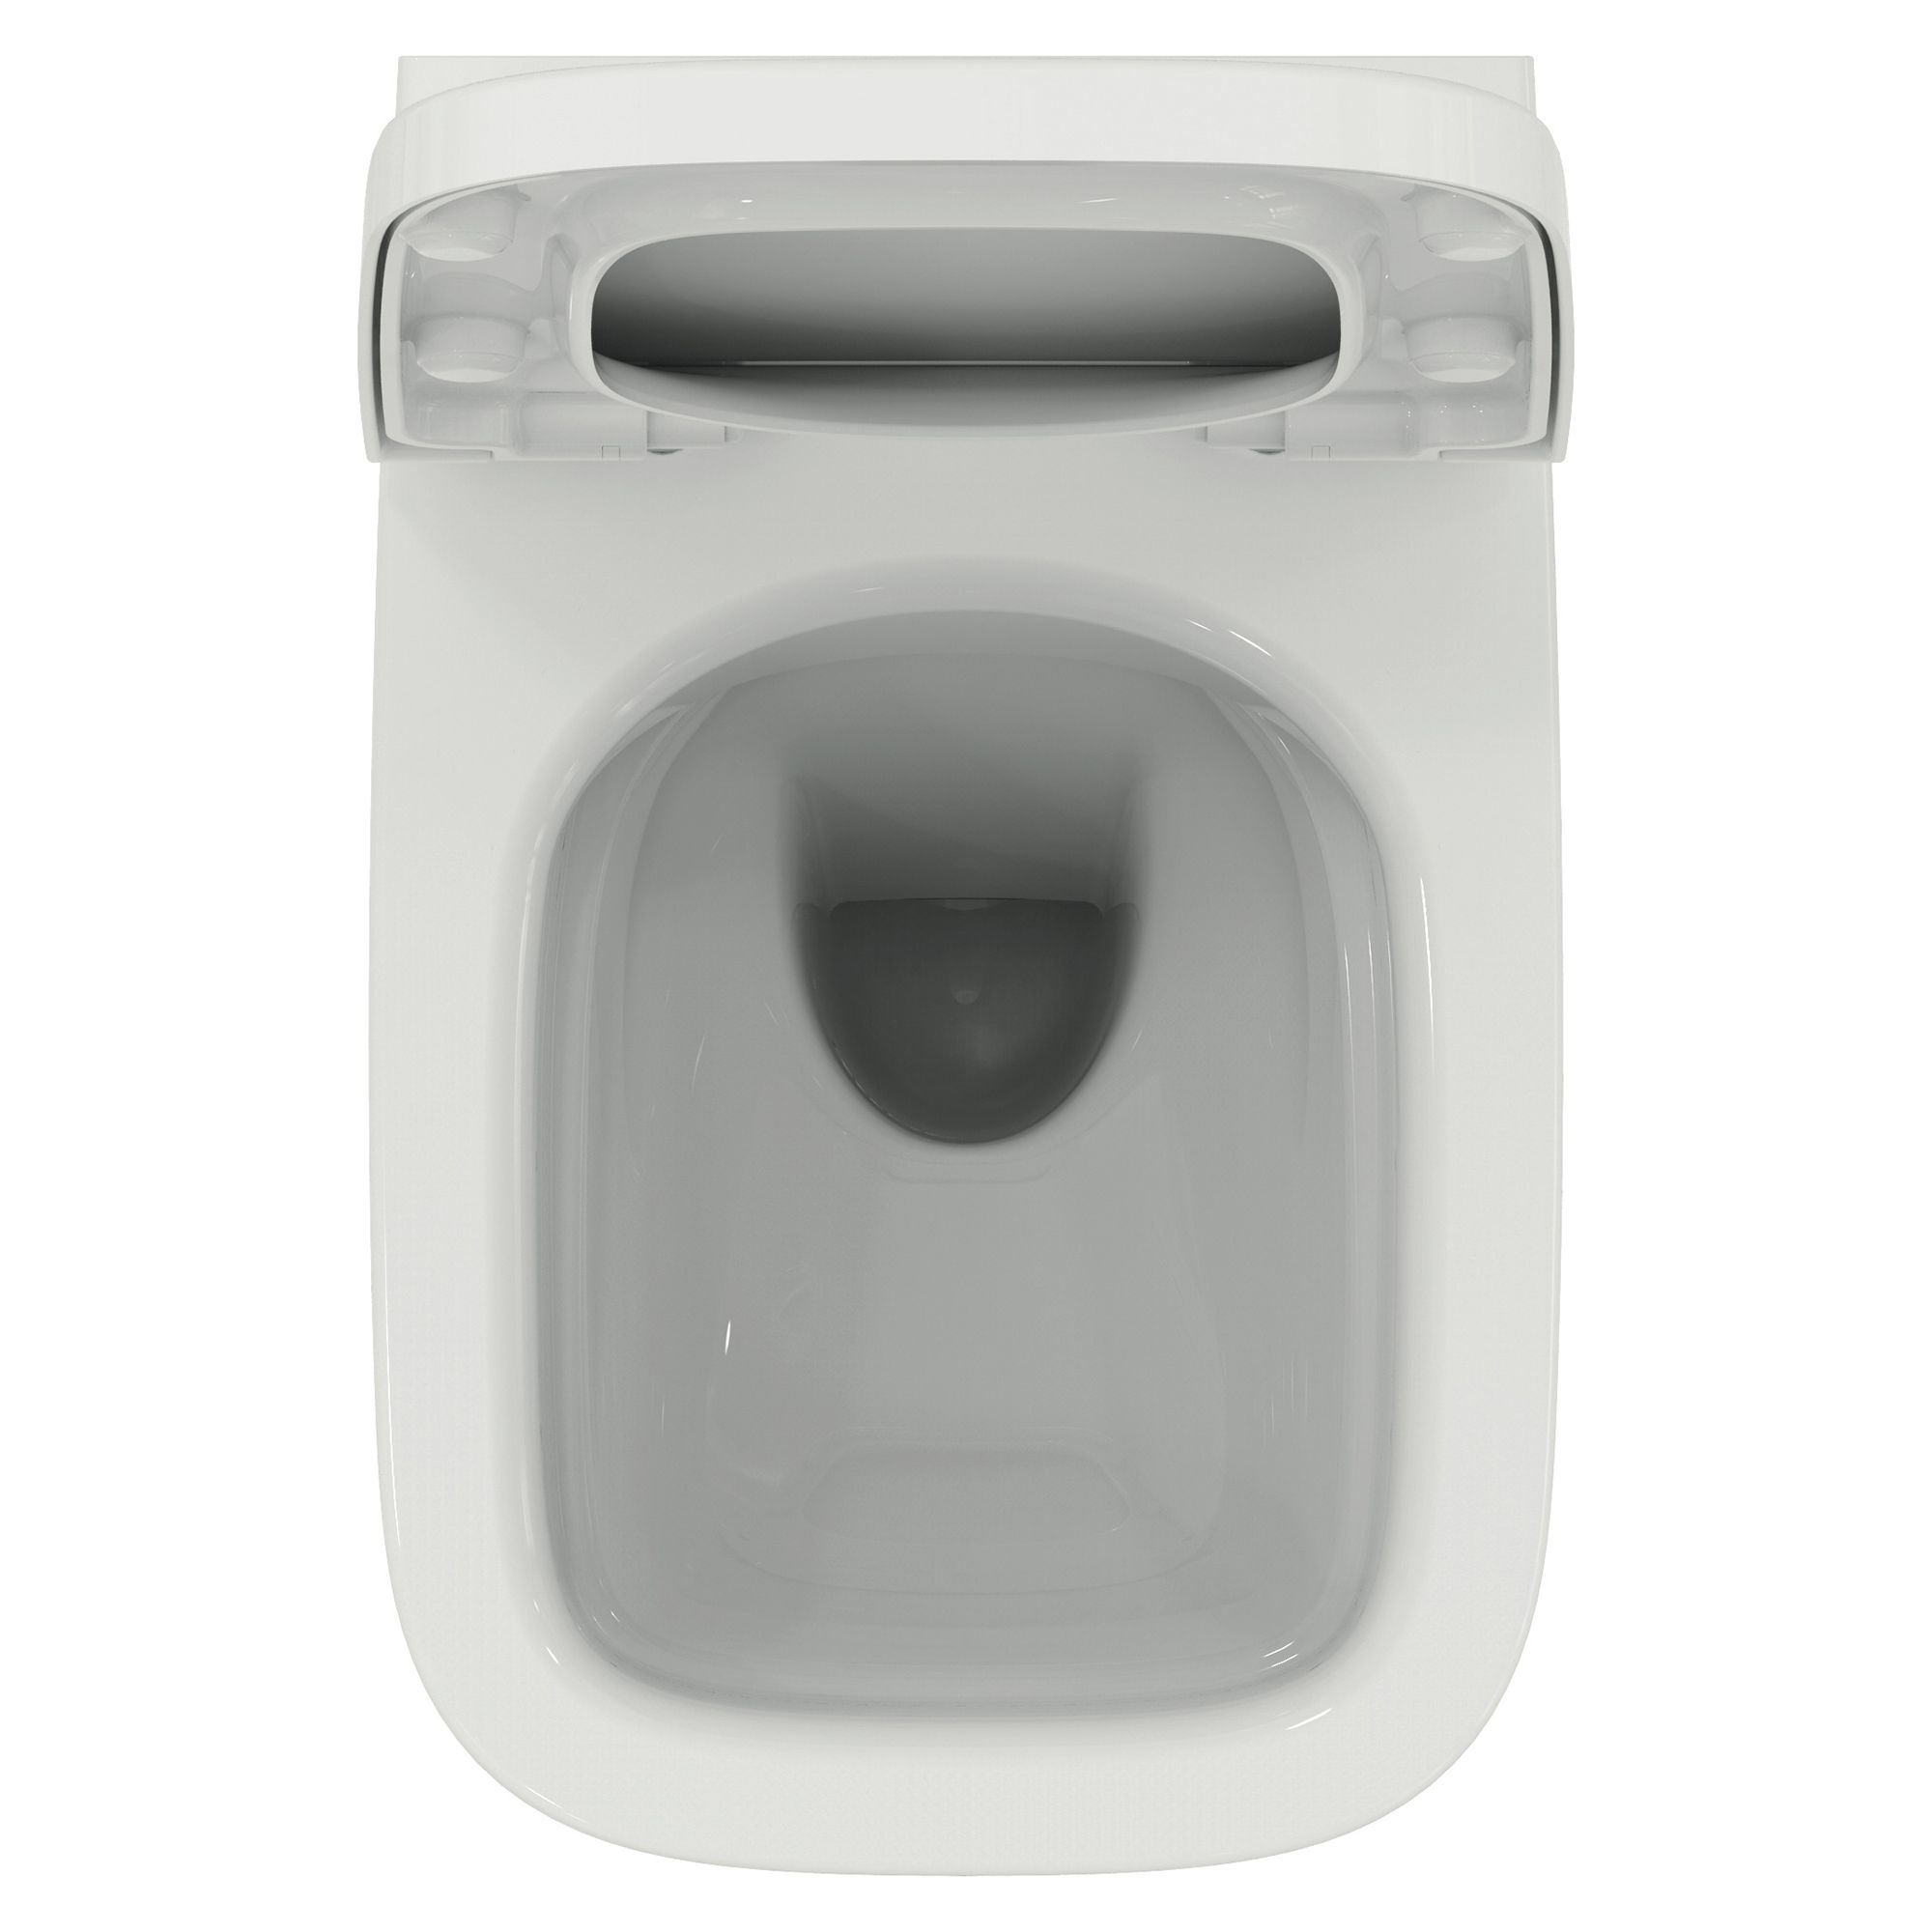 Ideal Standard i.life A White Standard Back to wall Square Toilet set with Soft close seat